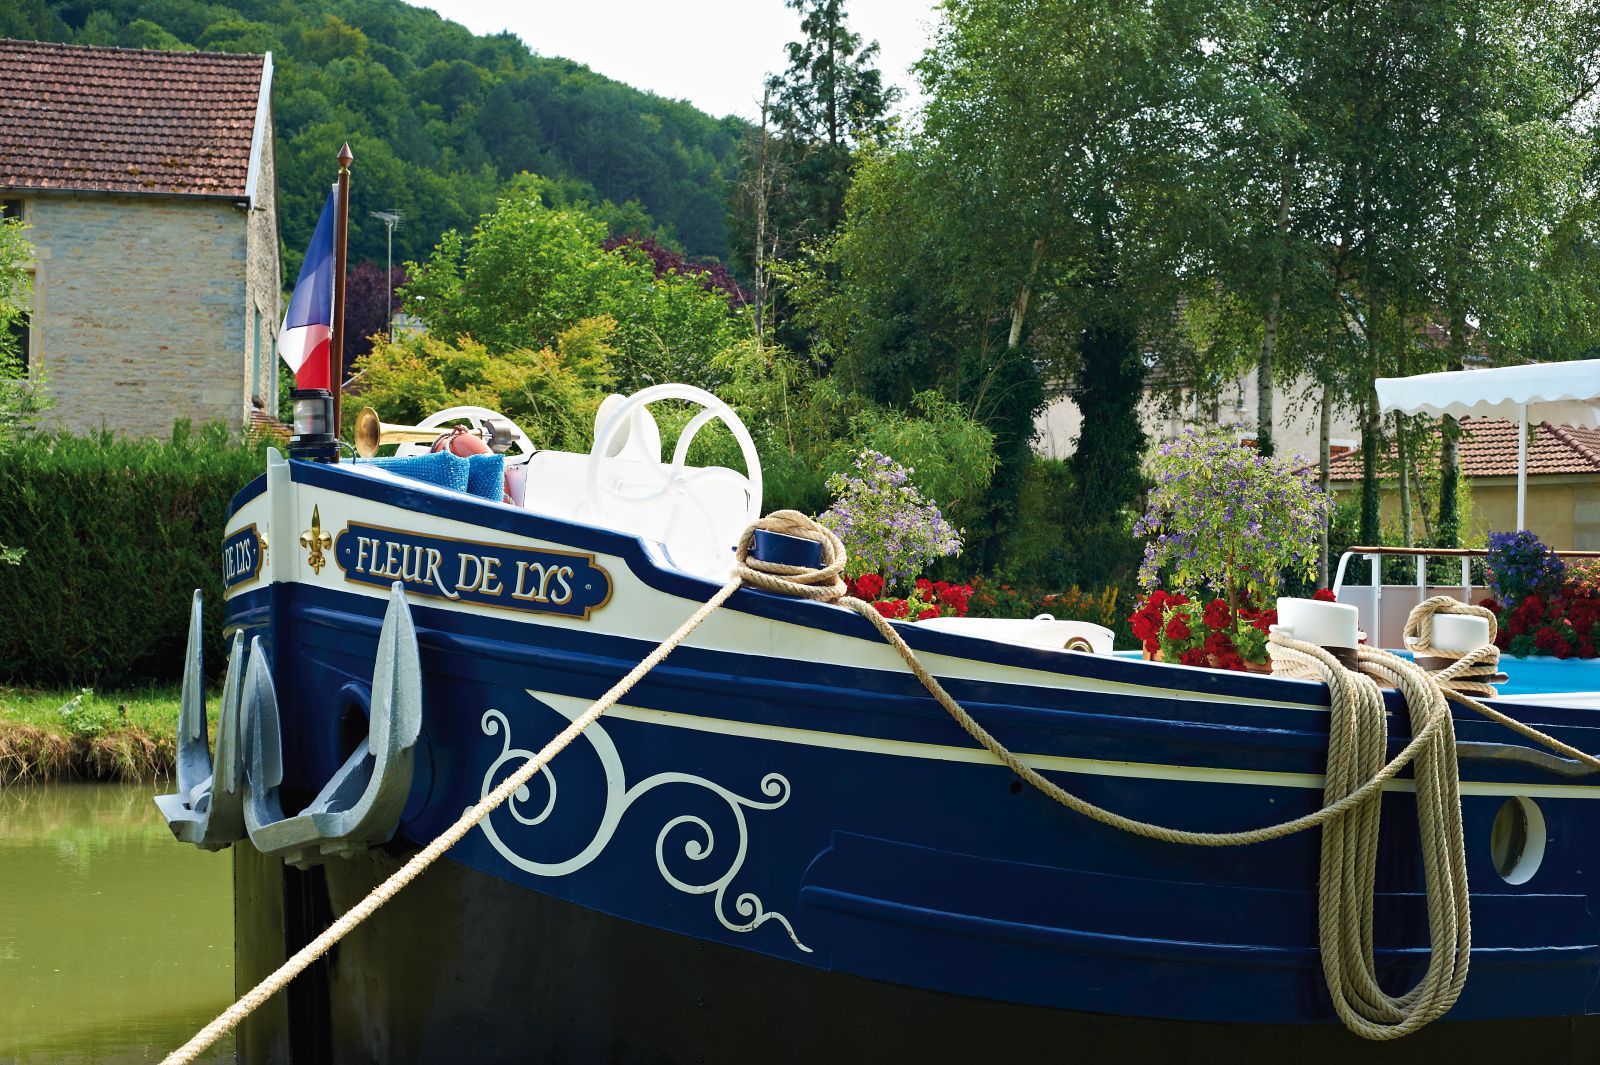 The bow of the Belmond Fleur de Lys river barge in France